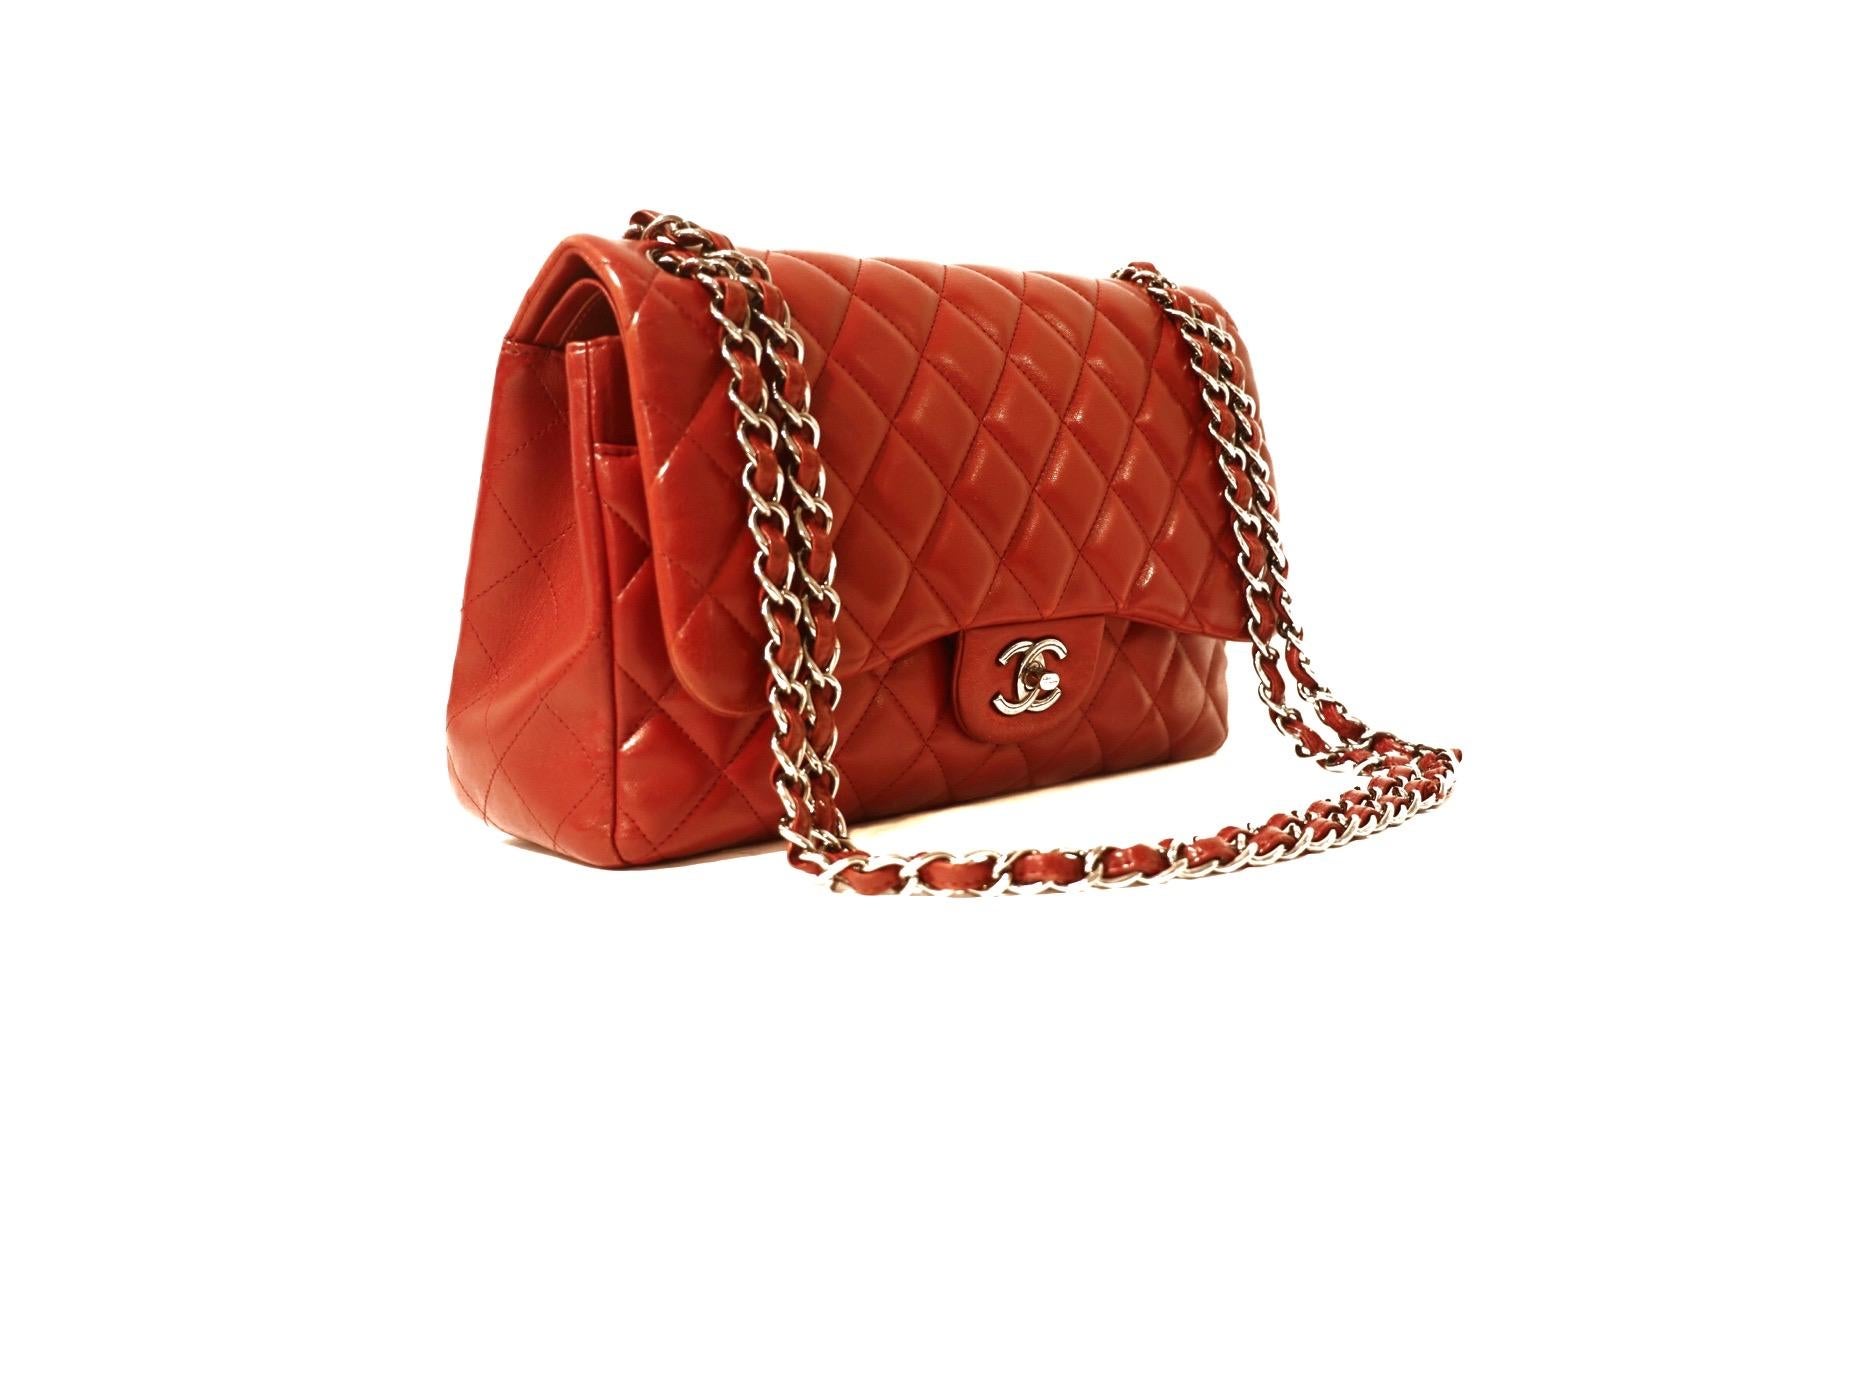 This authentic Chanel Red Leather Classic Double Flap Bag is in very good condition.  Truly striking in bright lipstick red leather, the timeless Classic Flap is a must have in any collection. 
Red leather is quilted in signature Chanel diamond